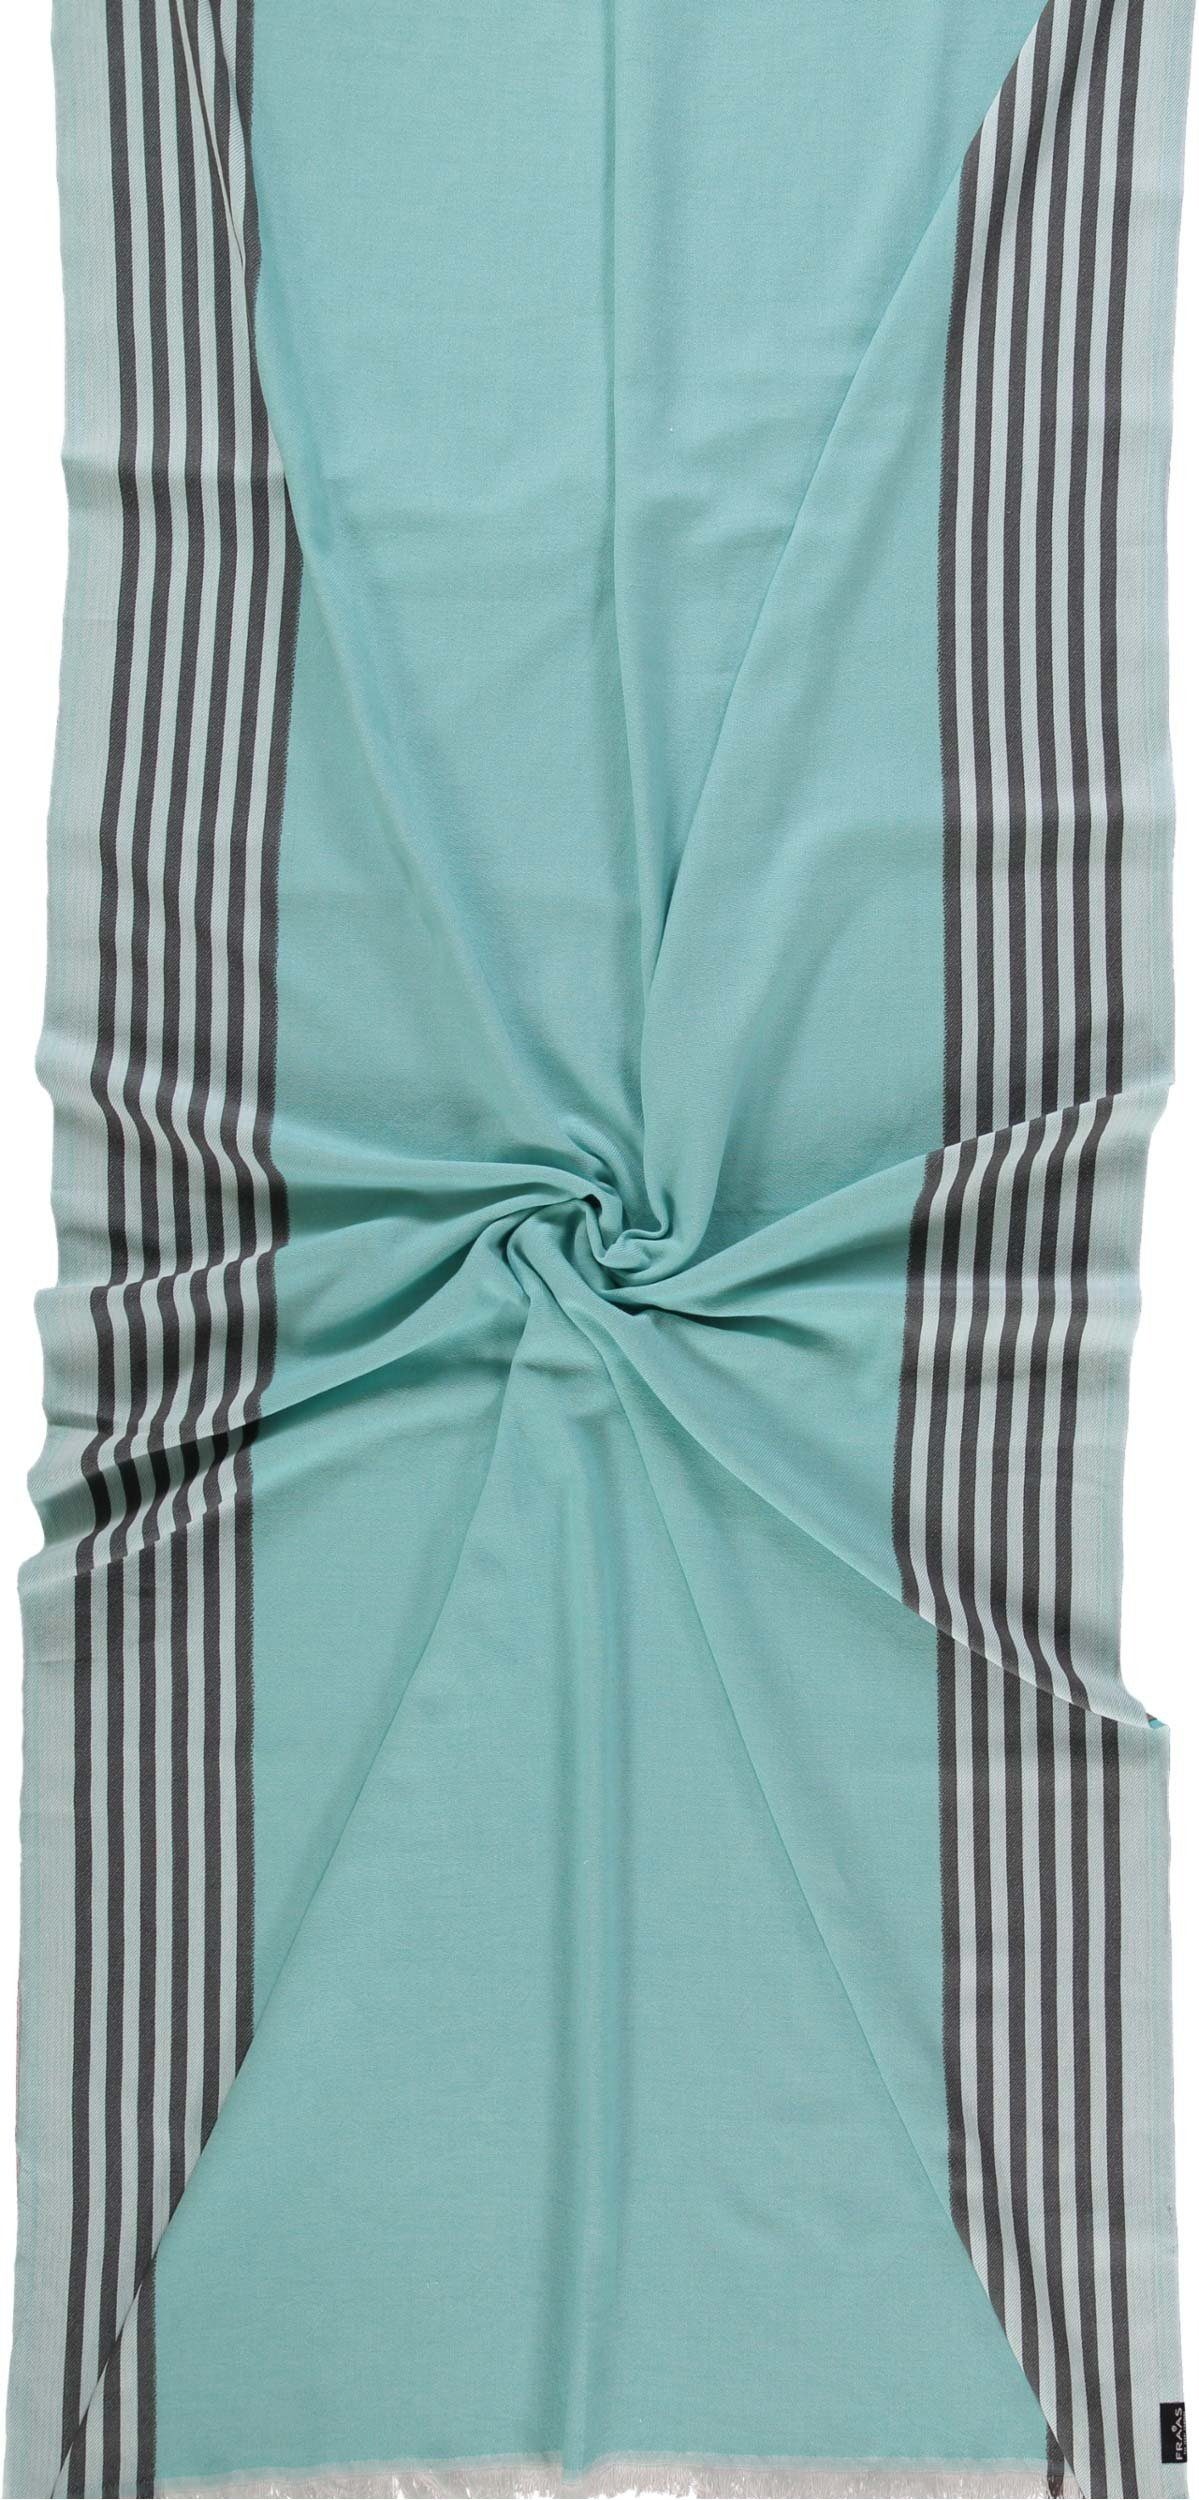 Fraas Modetuch Baumwolle Tuch, (1-St) light turquoise